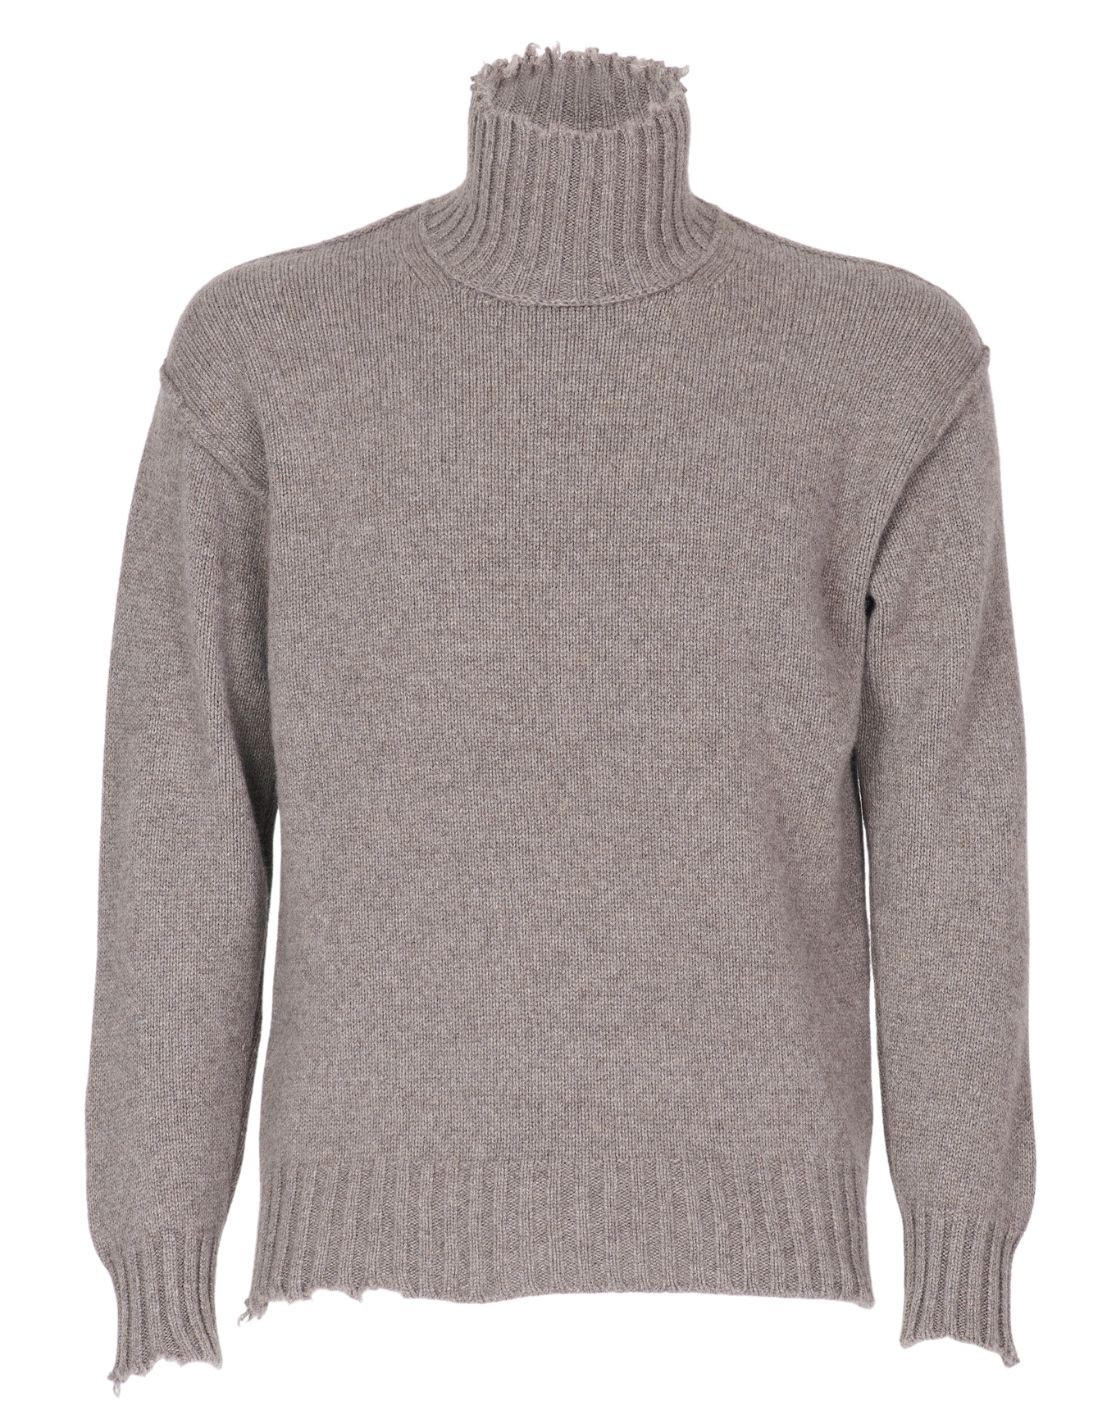 Isabel Benenato turtleneck sweater in taupe wool and cashmere - fw23